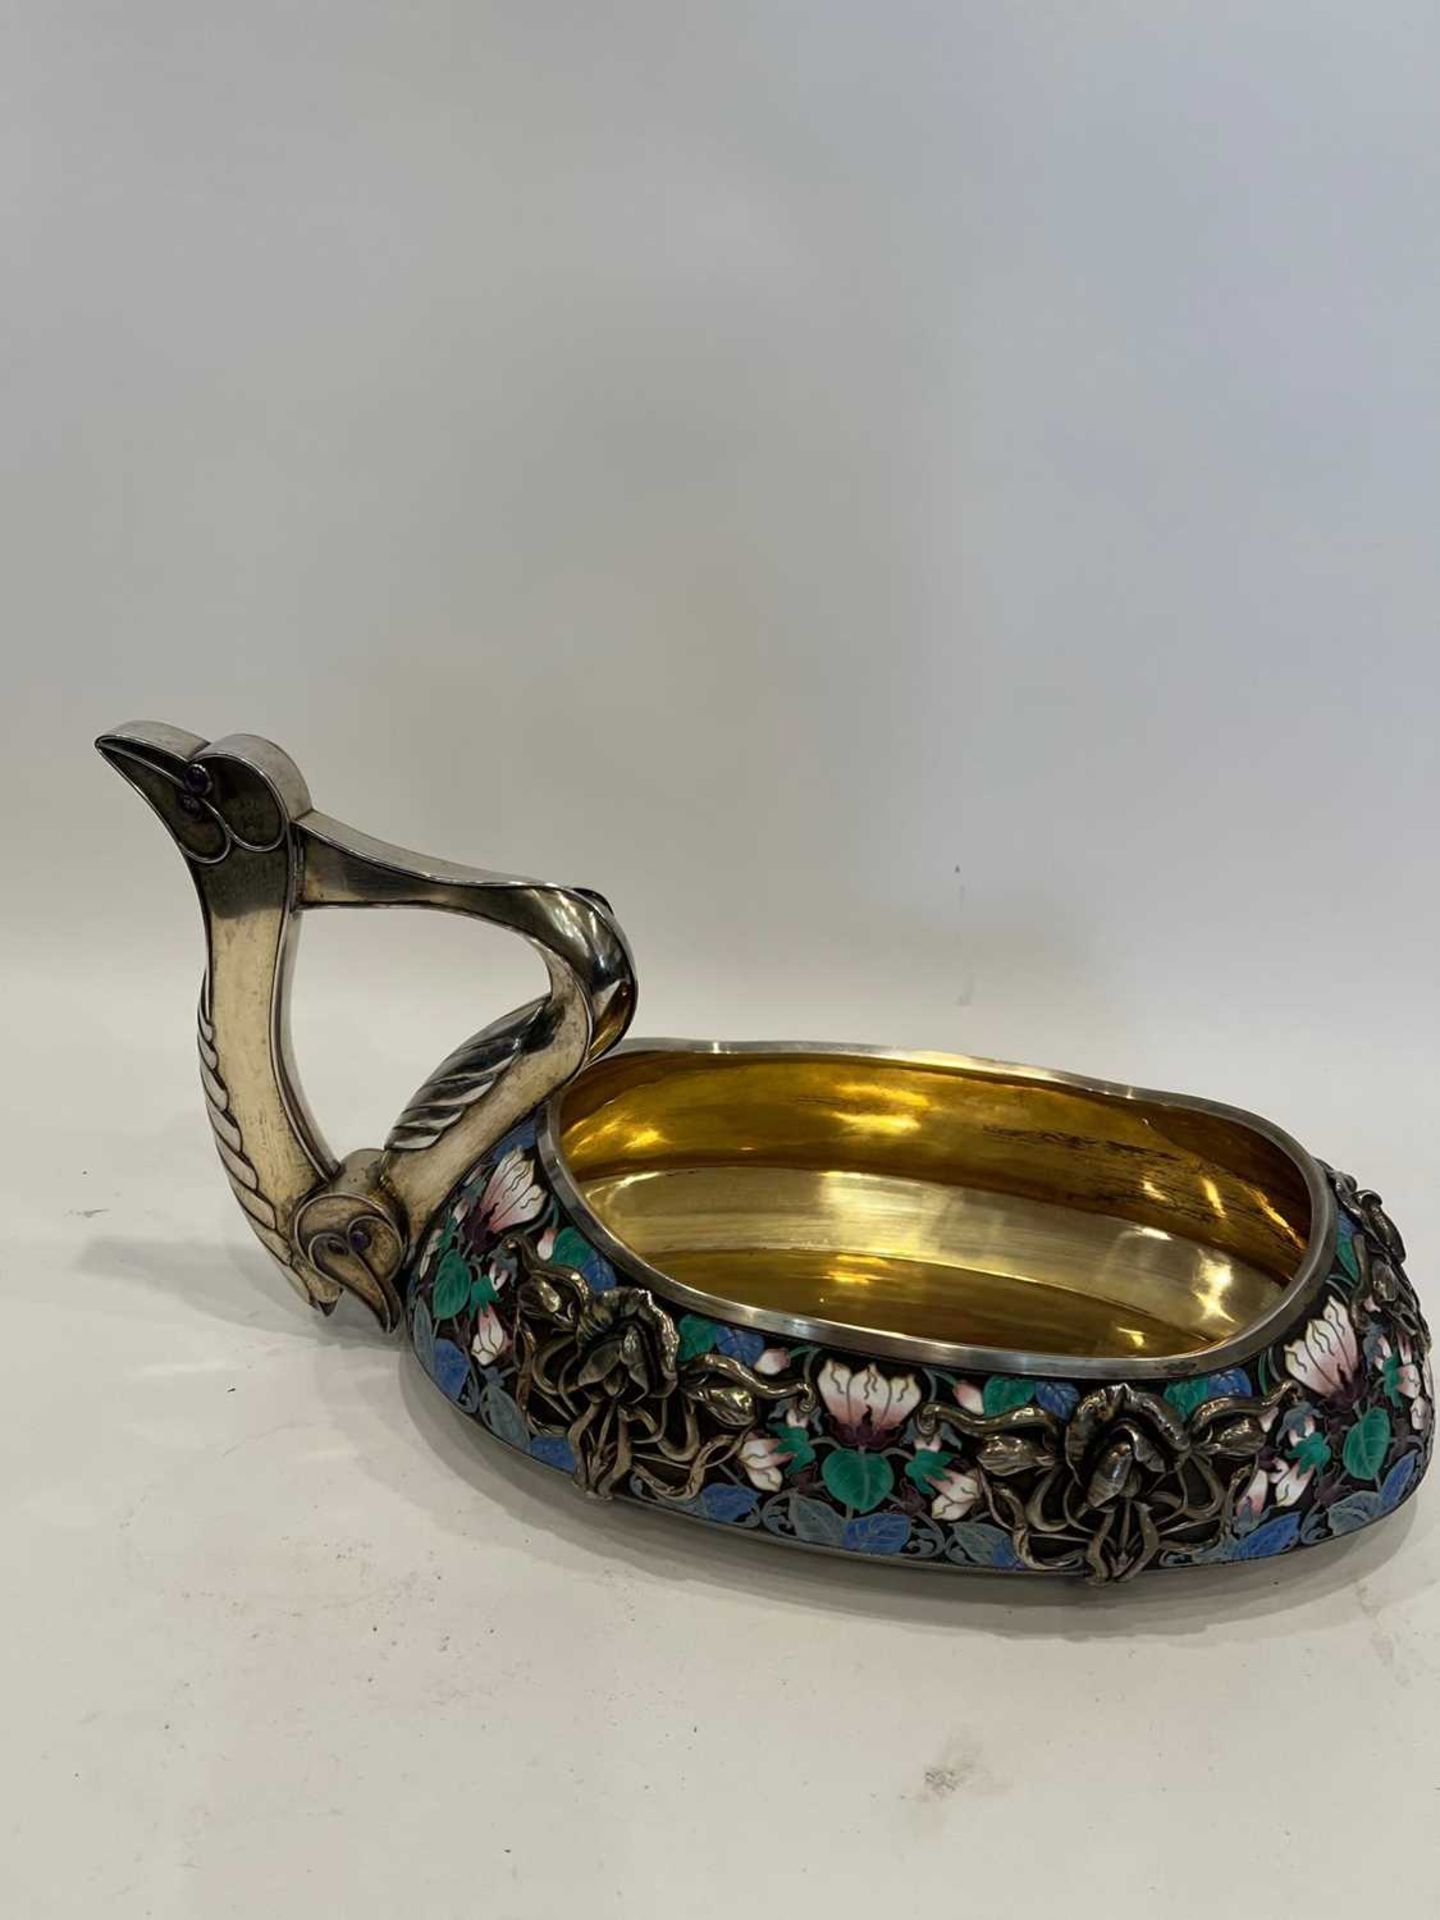 A MASSIVE EARLY 20TH CENTURY RUSSIAN SILVER AND ENAMEL KOVSH IN THE FORM OF A SWAN - Image 27 of 28